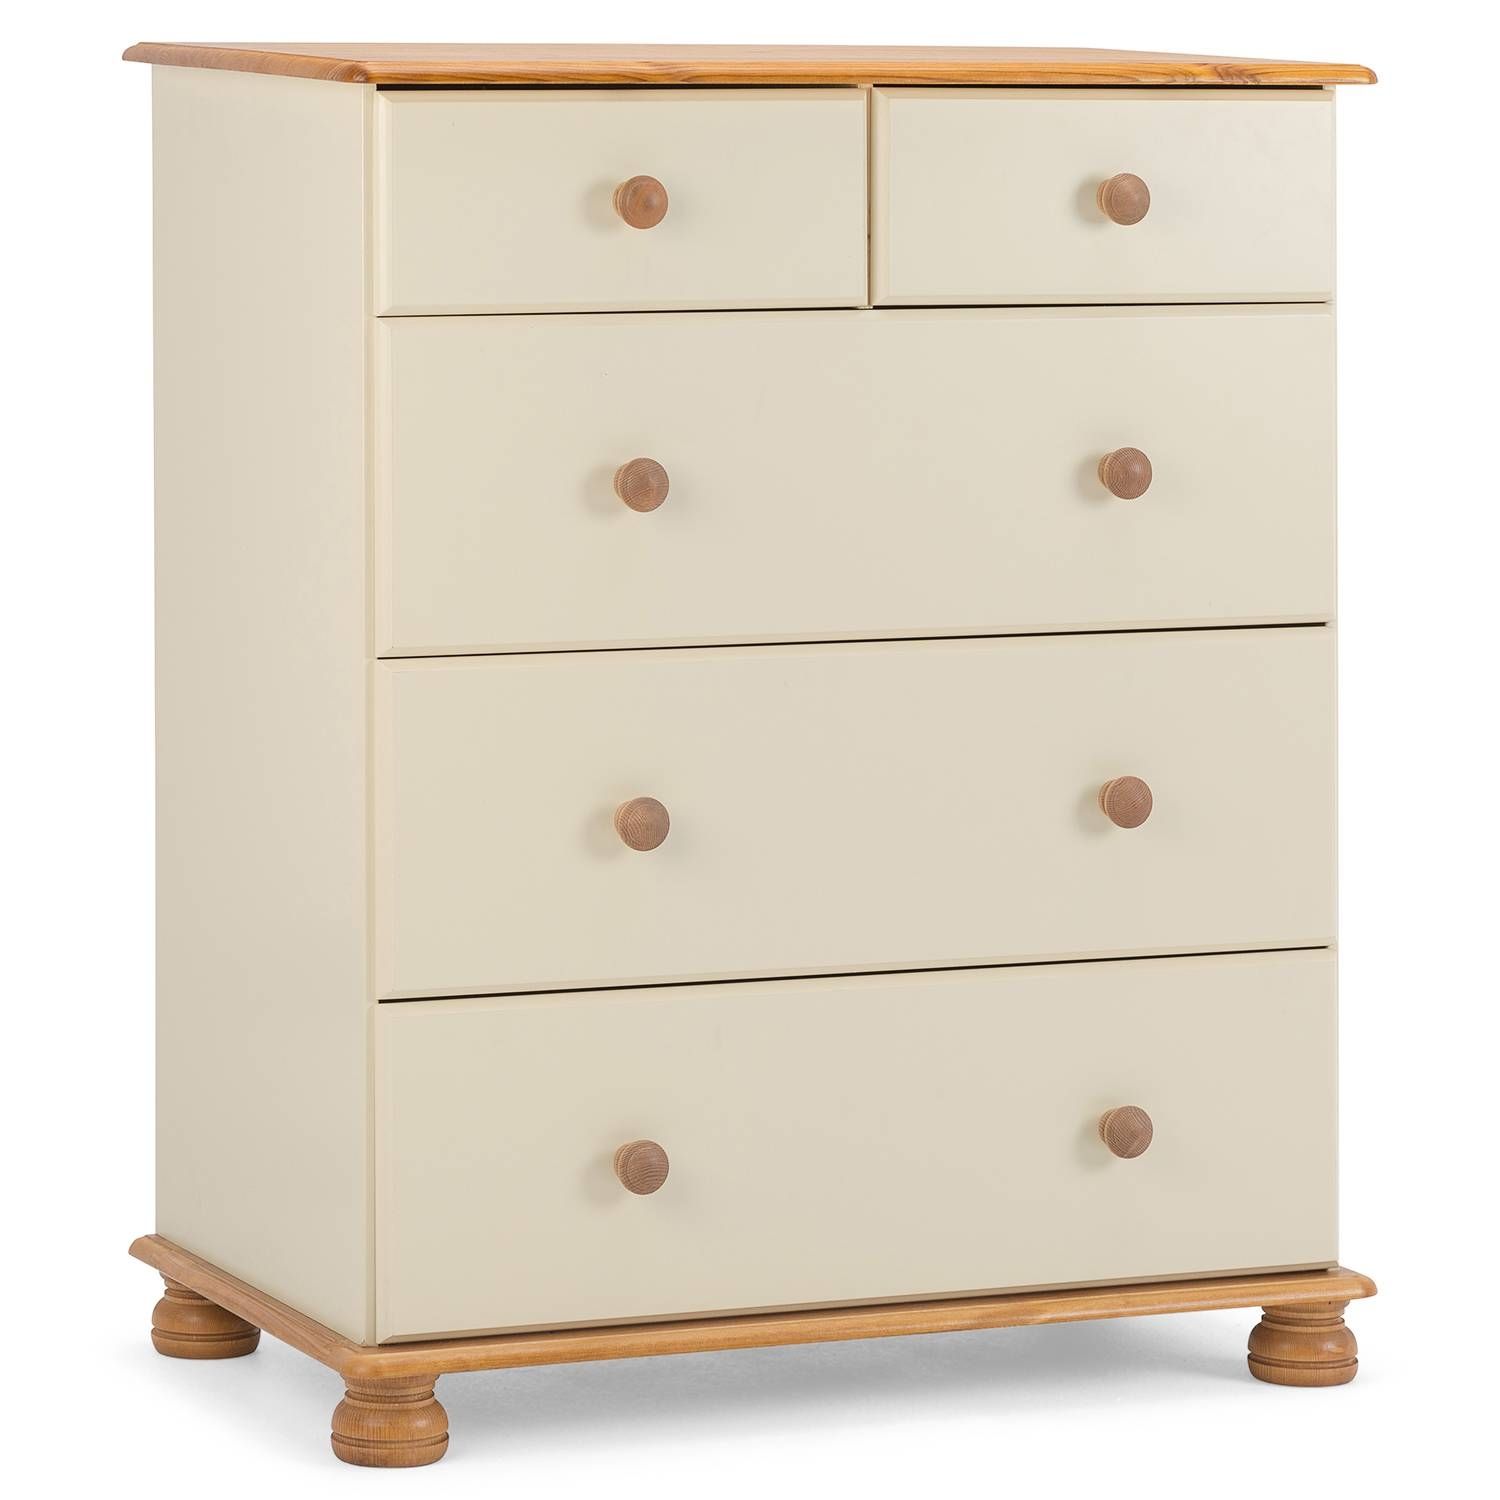 Cream Sideboards A Wide Selection Of Chest Of Drawers (View 21 of 30)